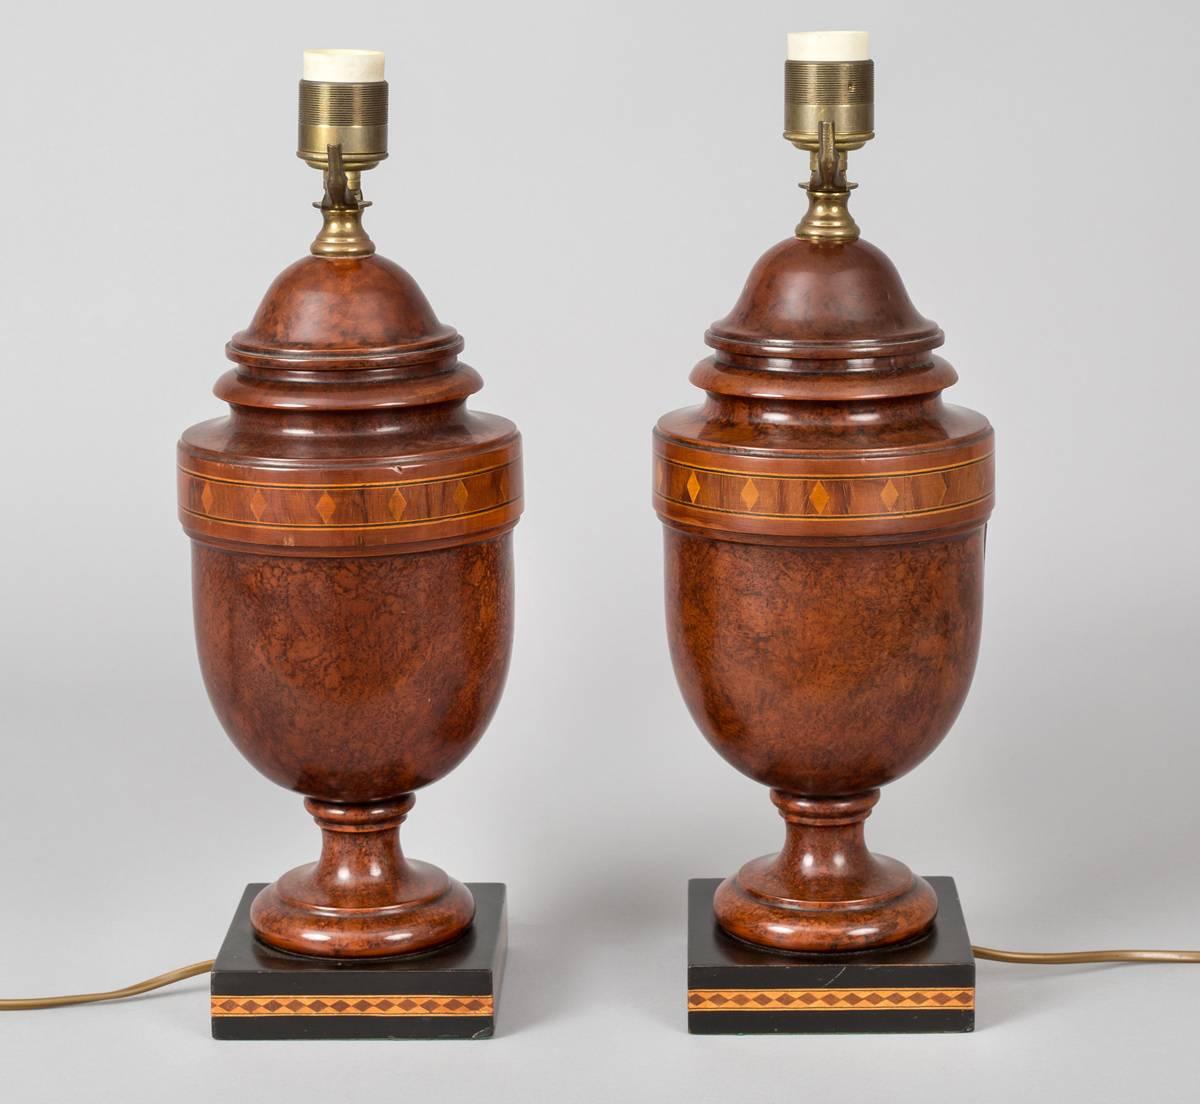 Pair of burl walnut inlaid vase-shaped lamps decorated with diamond patterned inlay around the top and base, mounted on an ebonized square base.